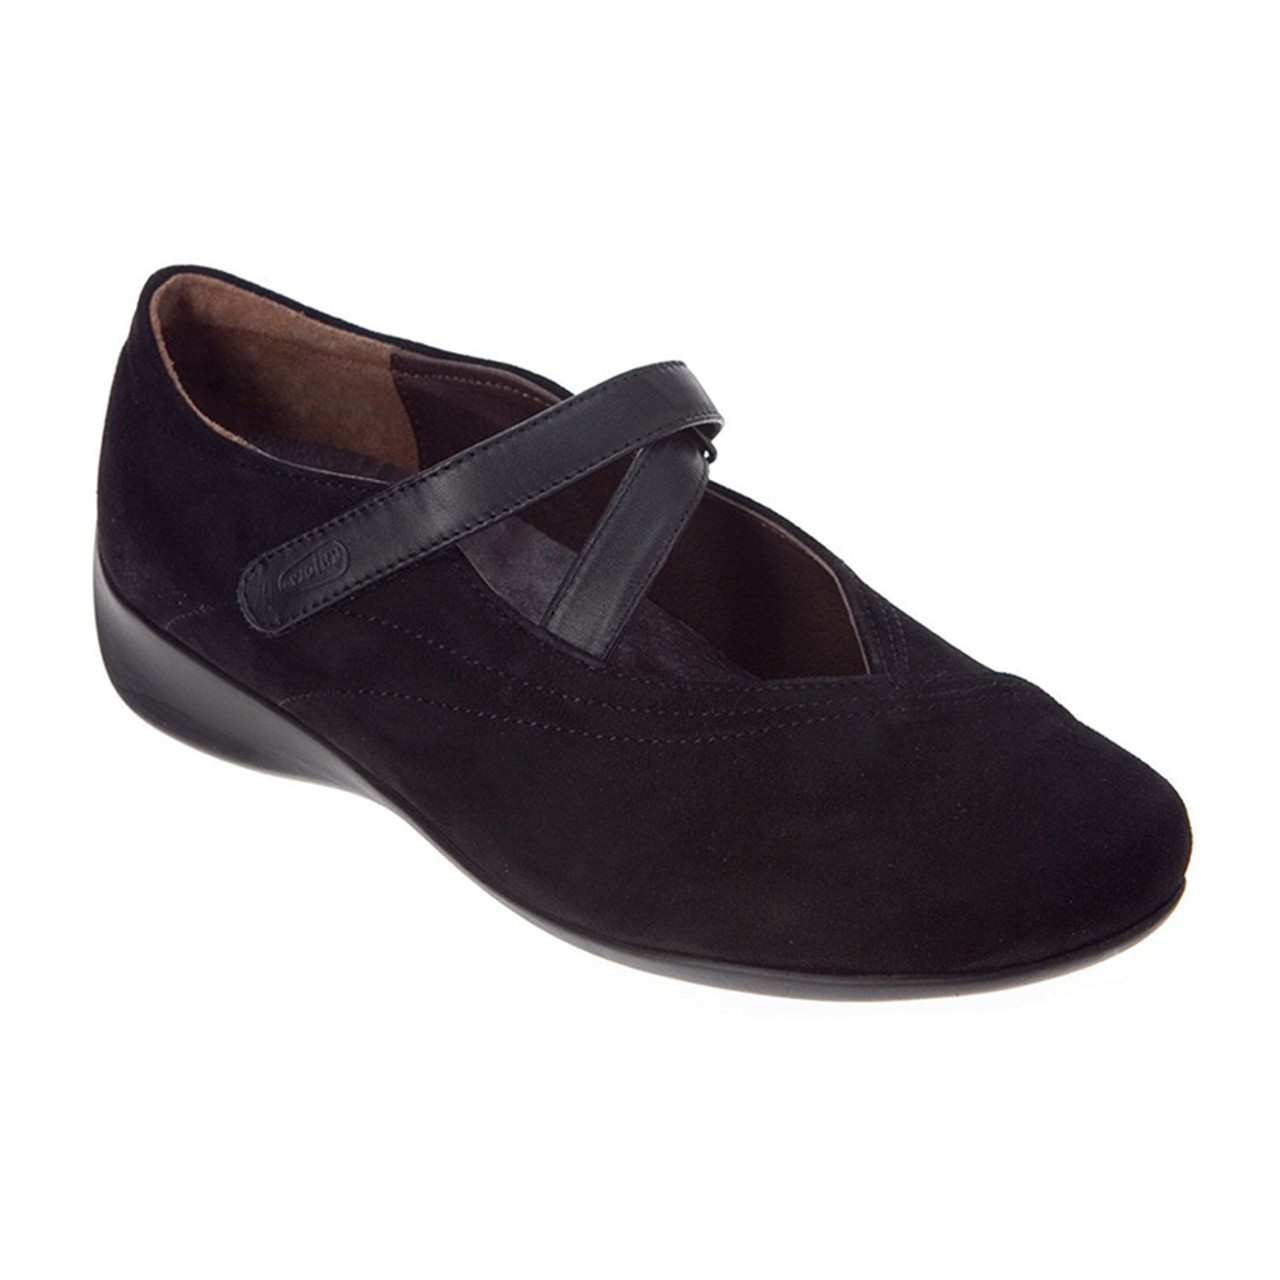 Wolky Women's Passion Mary Jane - Black | Discount Wolky Ladies Shoes ...